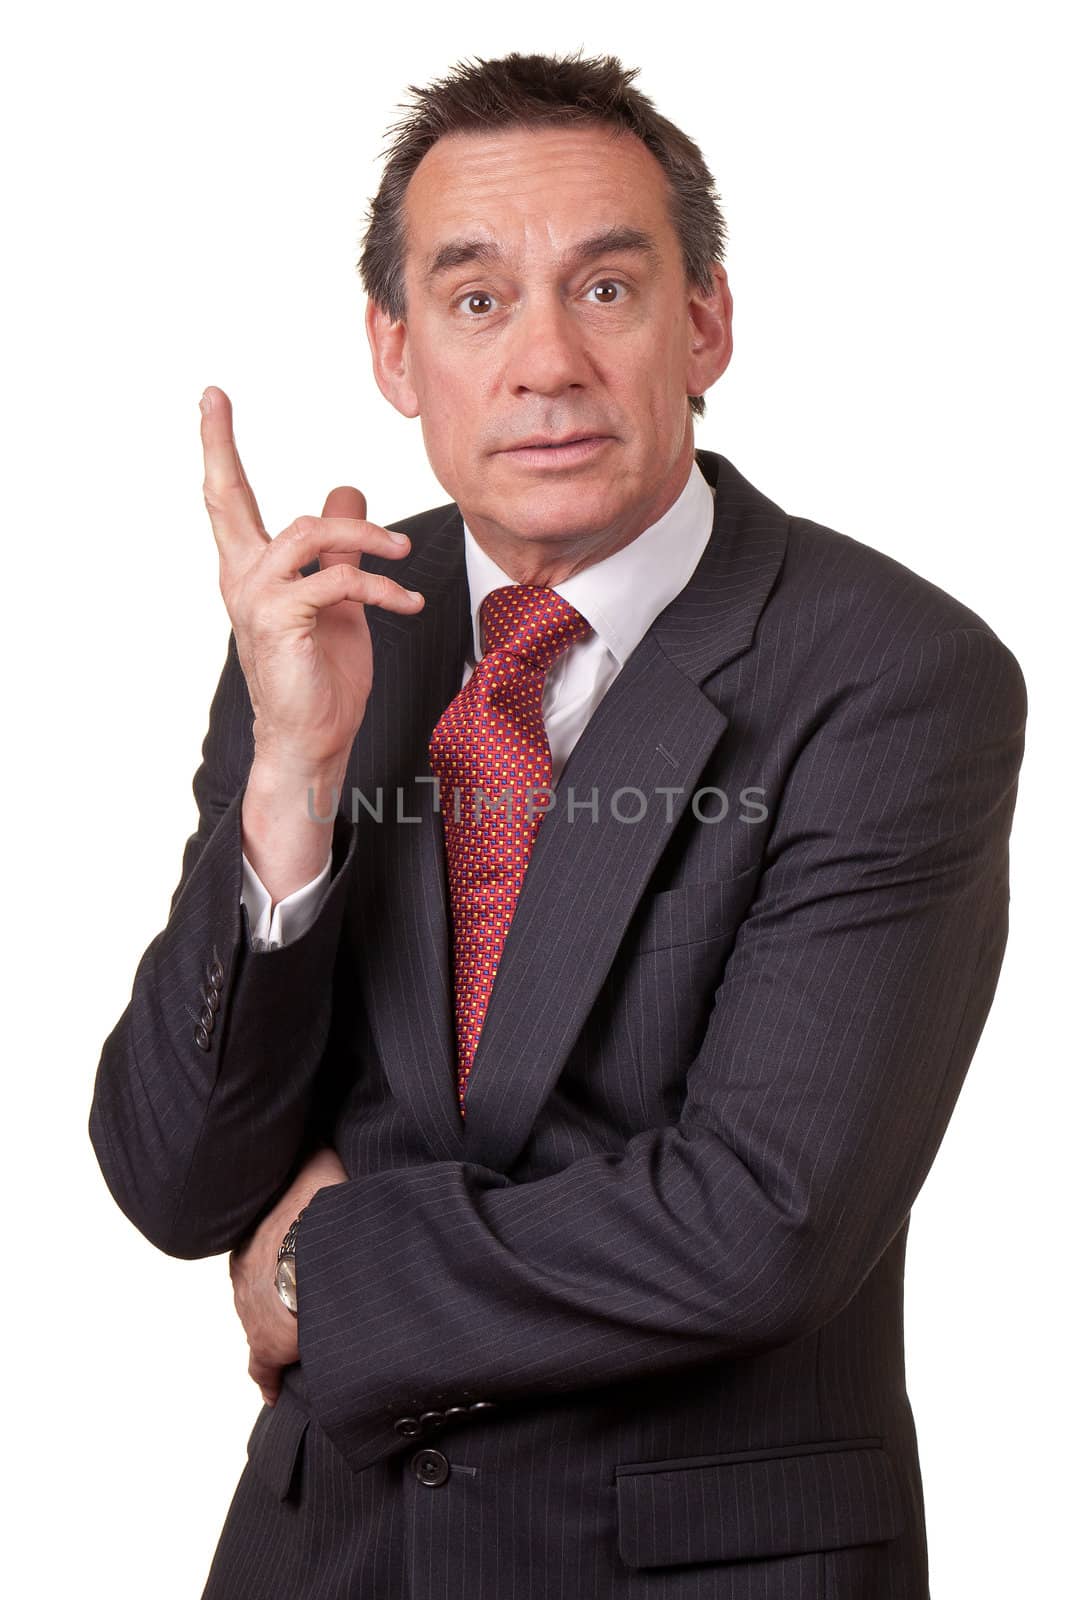 Puzzled Middle Age Business Man in Suit by scheriton